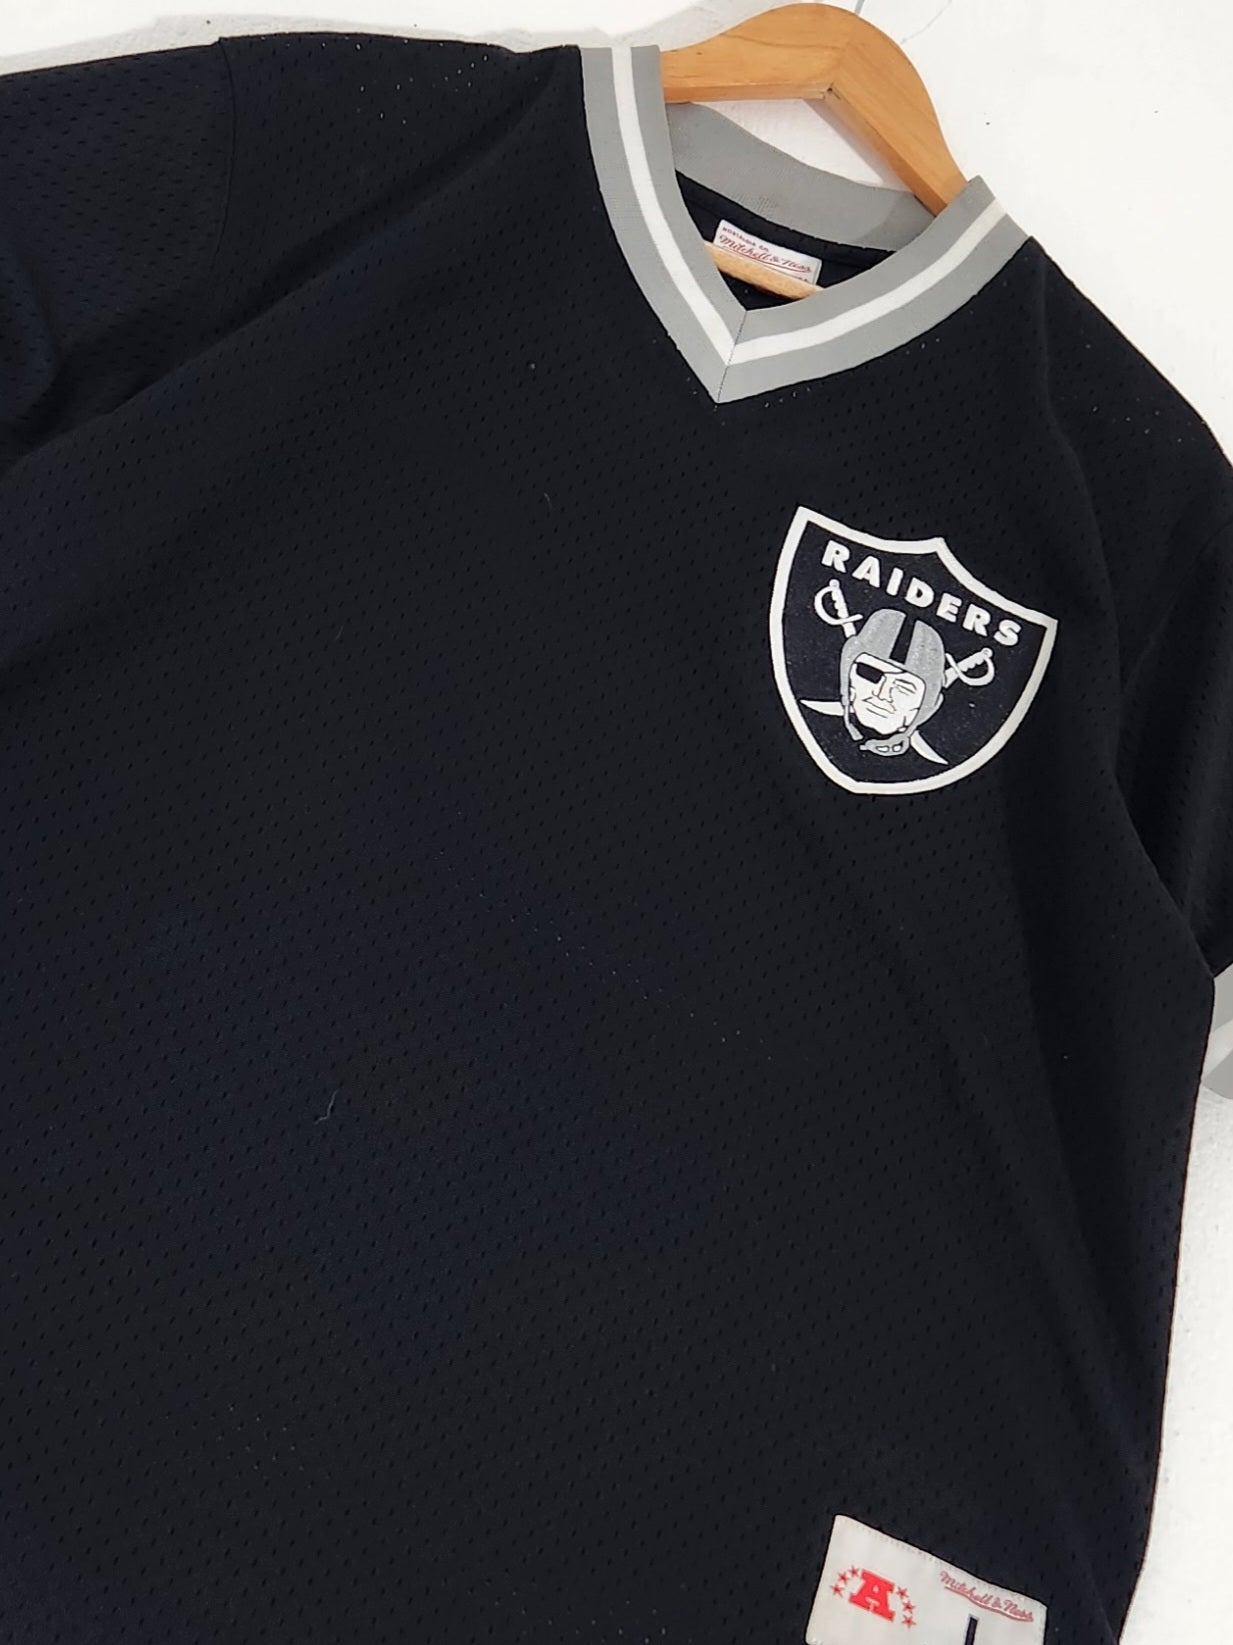 official raiders jersey